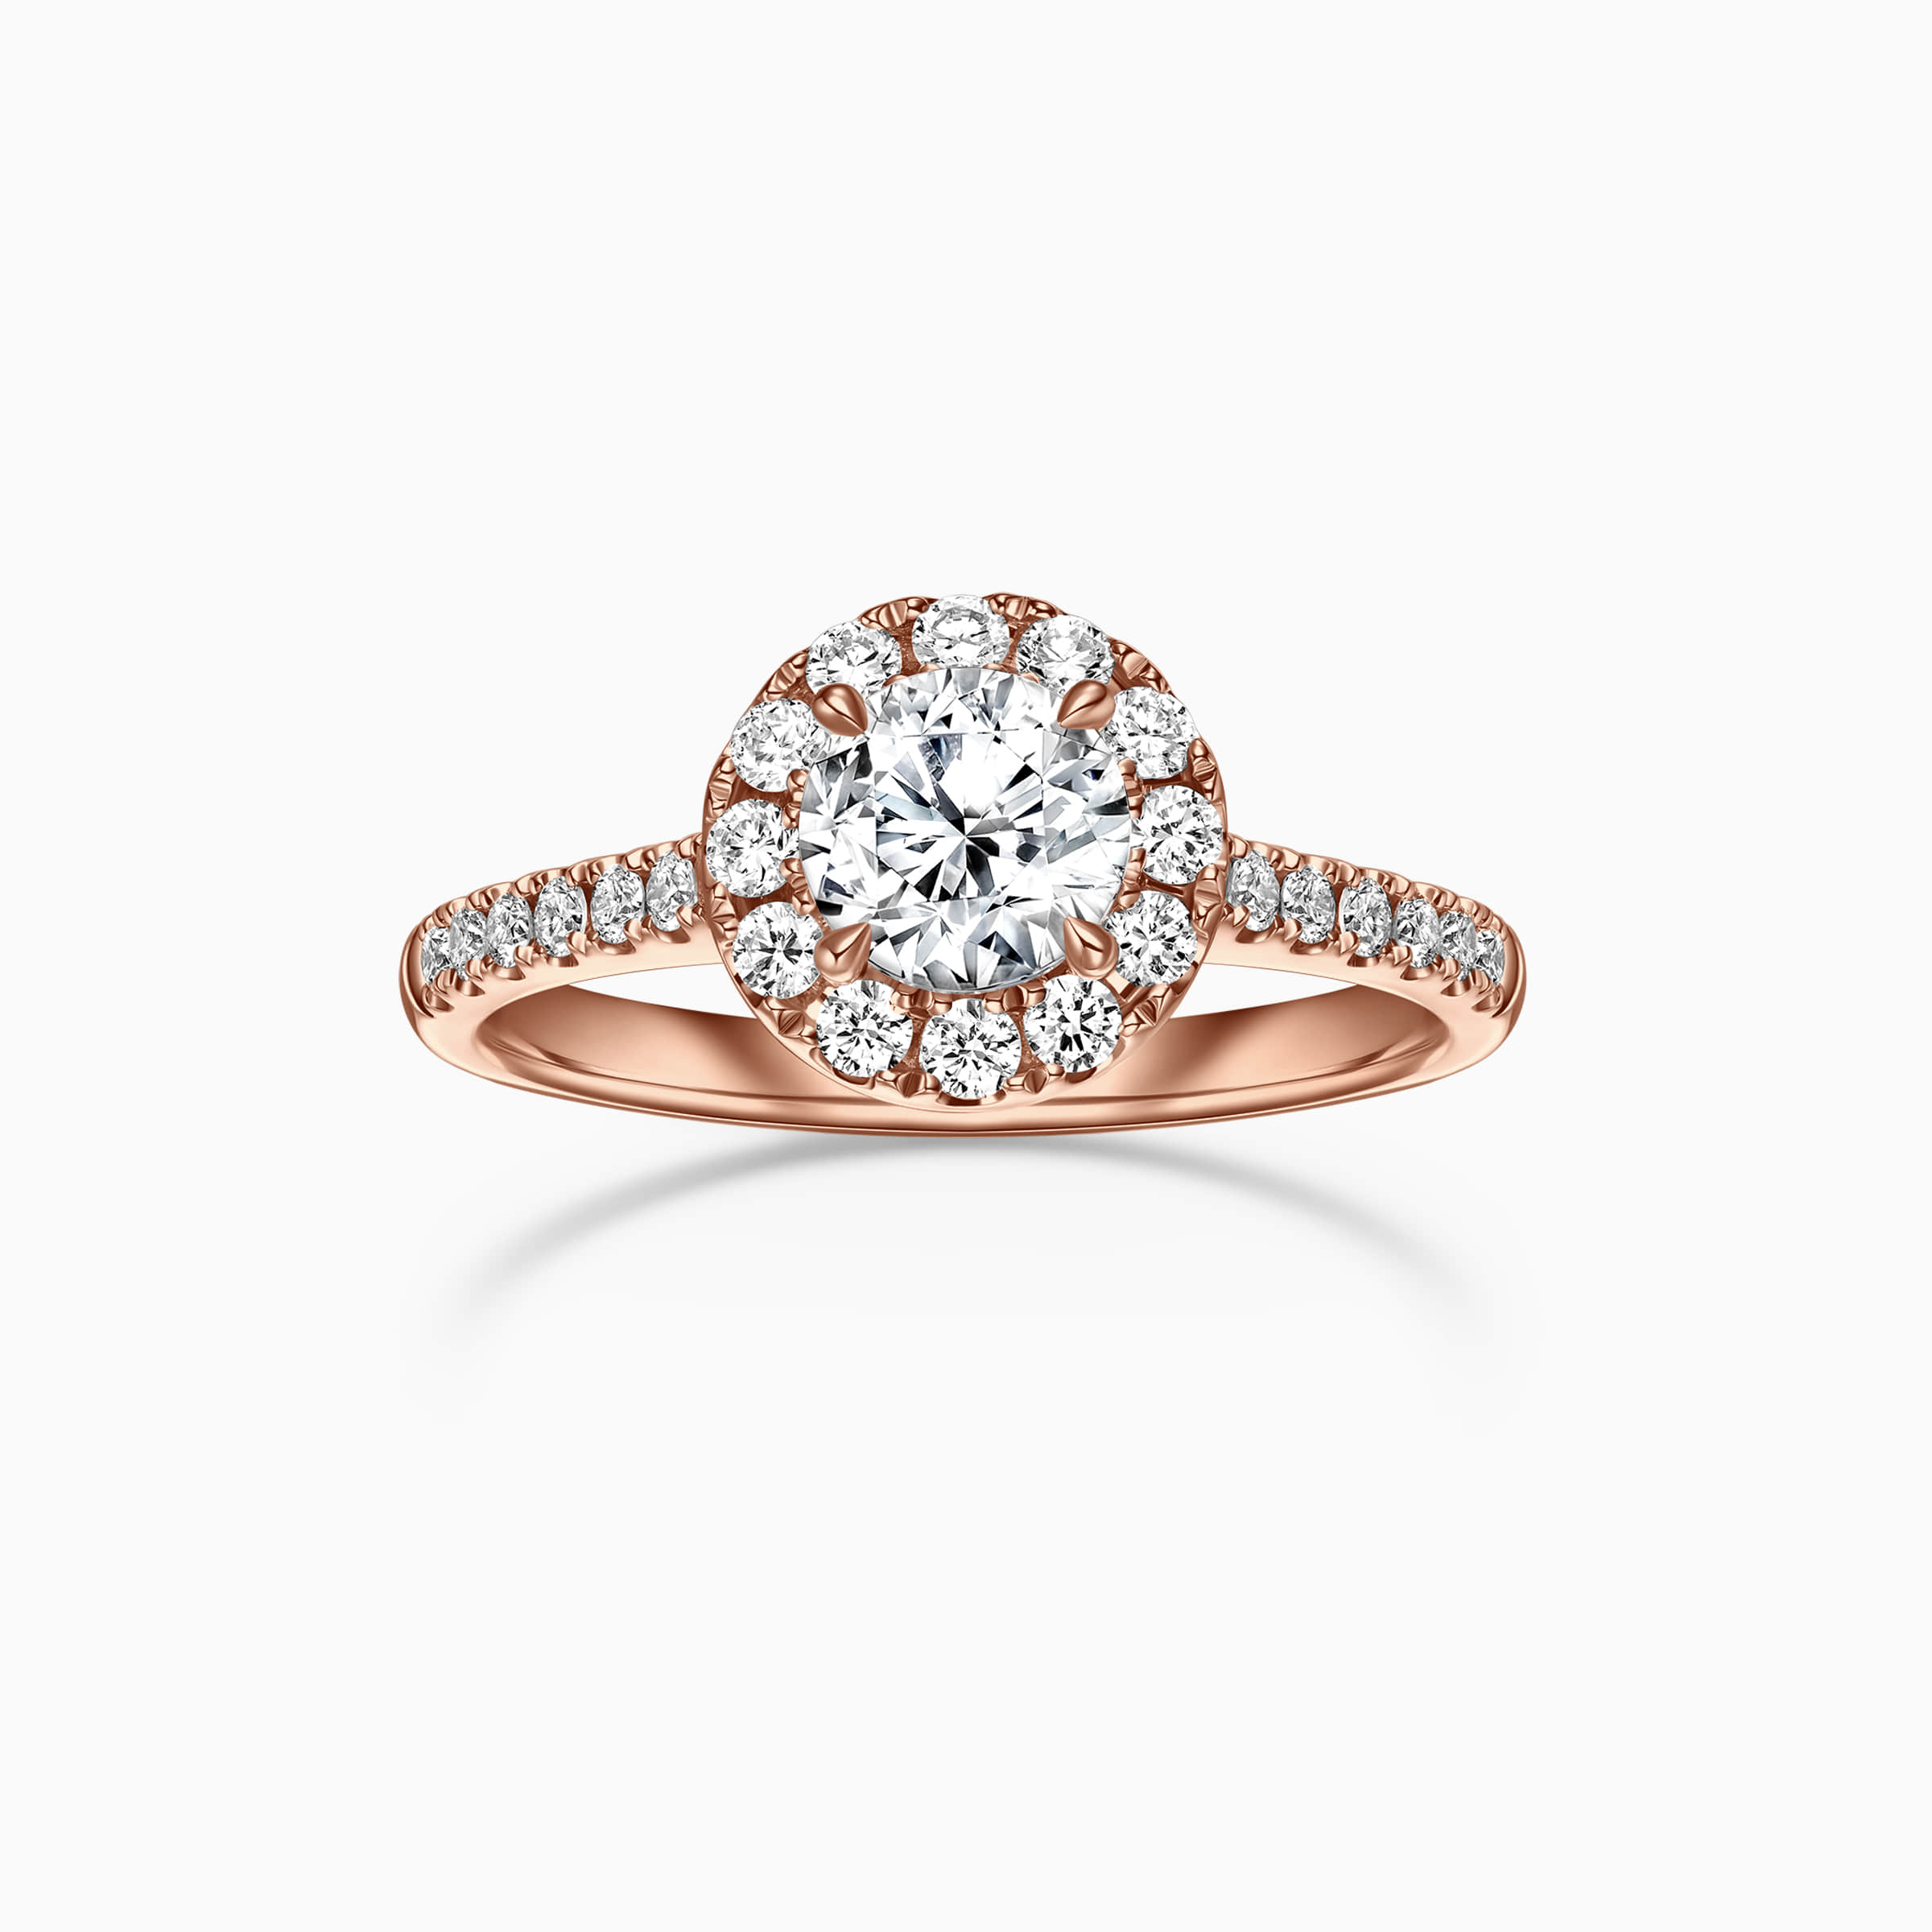 Darry Ring round halo promise ring rose gold